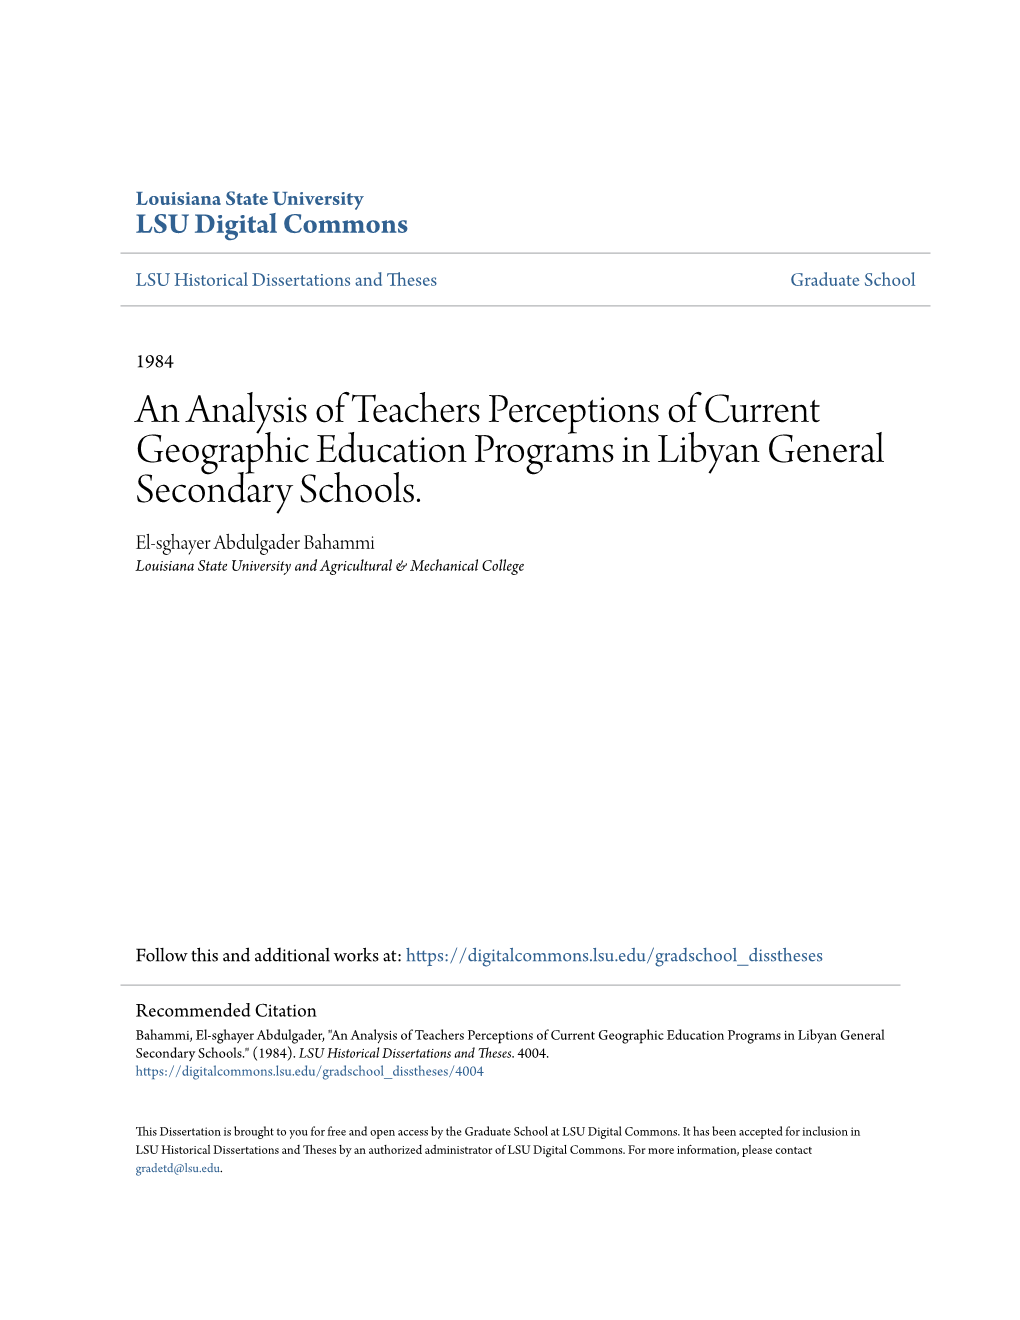 An Analysis of Teachers Perceptions of Current Geographic Education Programs in Libyan General Secondary Schools